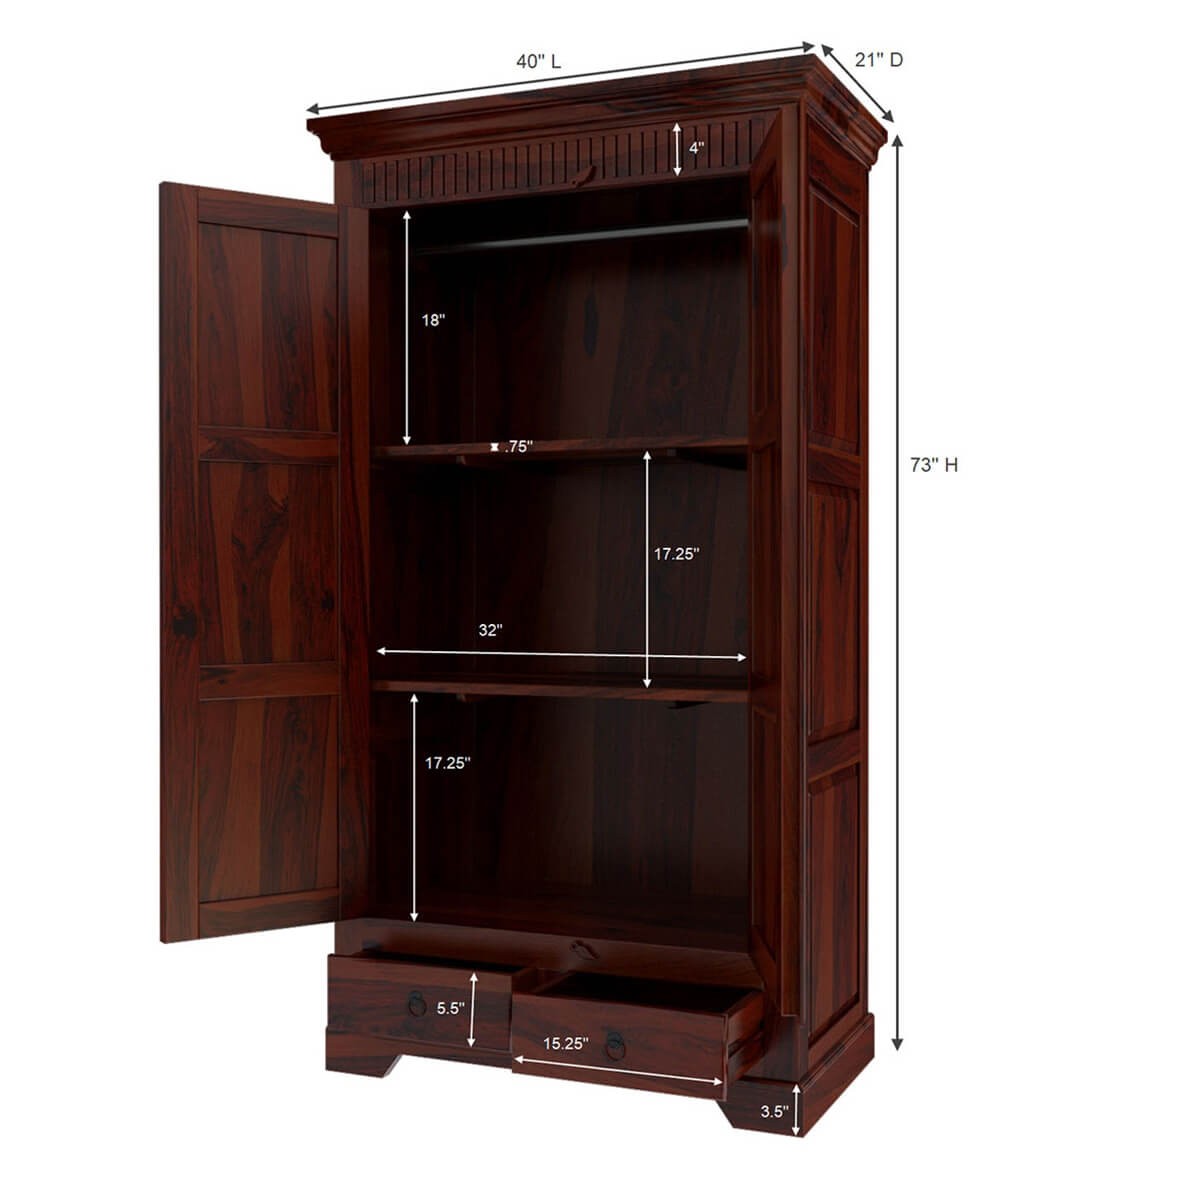 Marengo large rustic solid wood wardrobe armoire with